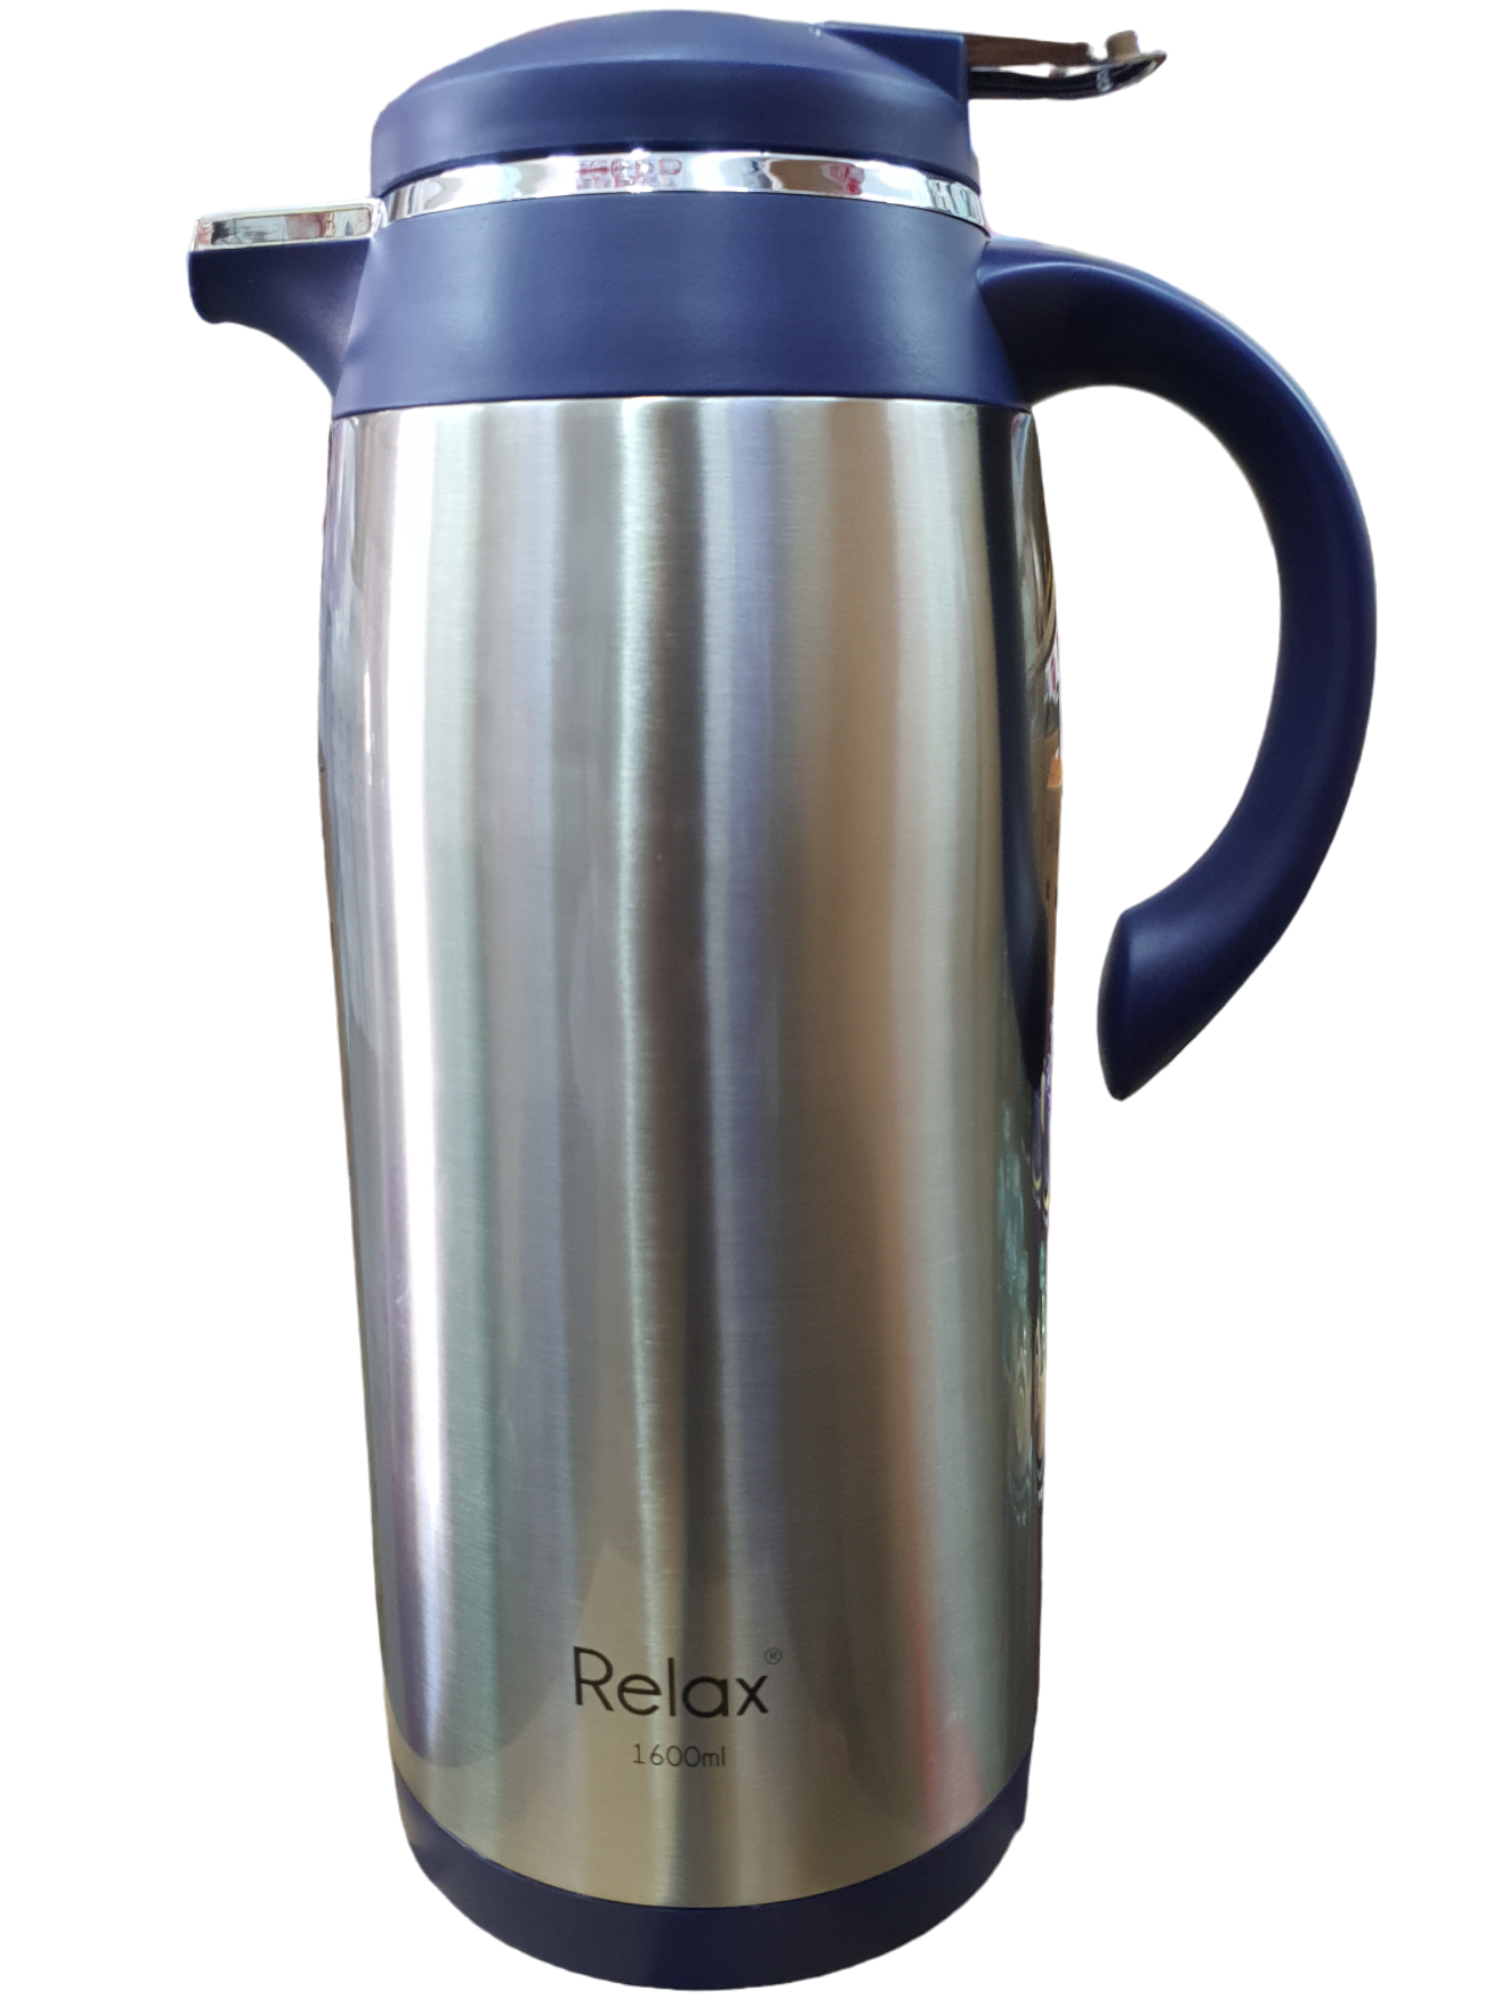 Relax Stainless Steel Thermal Carafe Blue 1600ml